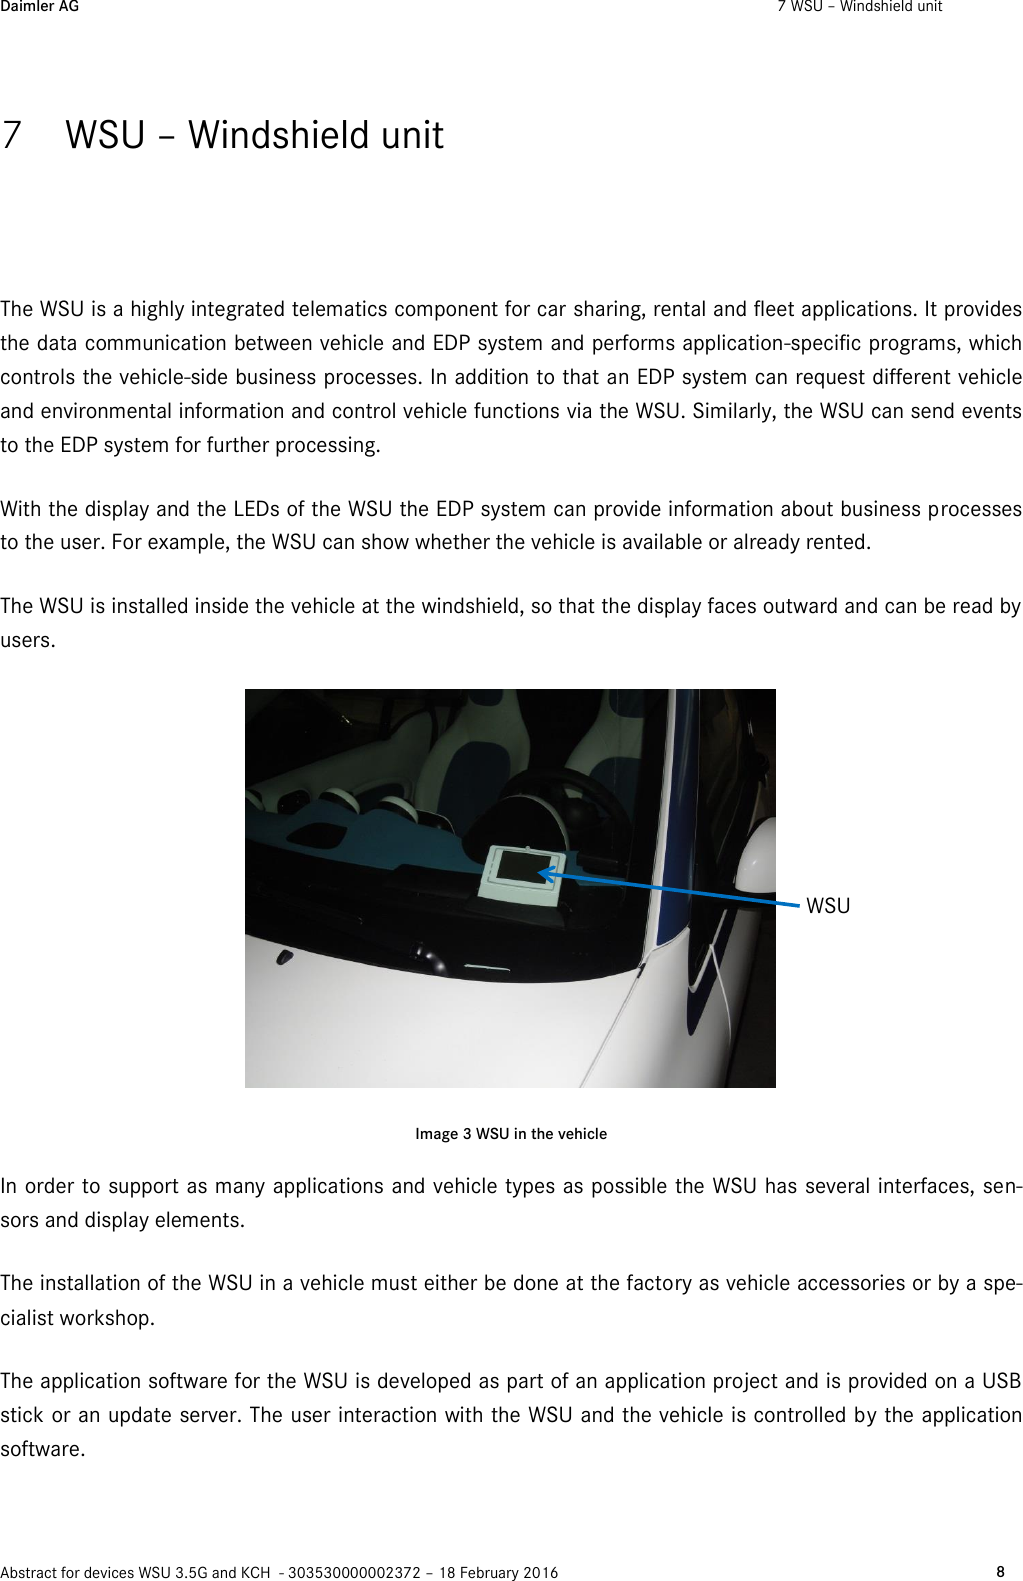 Daimler AG  7 WSU – Windshield unit    Abstract for devices WSU 3.5G and KCH  - 303530000002372 – 18 February 2016   8  7 WSU – Windshield unit The WSU is a highly integrated telematics component for car sharing, rental and fleet applications. It provides the data communication between vehicle and EDP system and performs application-specific programs, which controls the vehicle-side business processes. In addition to that an EDP system can request different vehicle and environmental information and control vehicle functions via the WSU. Similarly, the WSU can send events to the EDP system for further processing. With the display and the LEDs of the WSU the EDP system can provide information about business processes to the user. For example, the WSU can show whether the vehicle is available or already rented. The WSU is installed inside the vehicle at the windshield, so that the display faces outward and can be read by users.  Image 3 WSU in the vehicle In order to support as many applications and vehicle types as possible the WSU has several interfaces, sen-sors and display elements. The installation of the WSU in a vehicle must either be done at the factory as vehicle accessories or by a spe-cialist workshop. The application software for the WSU is developed as part of an application project and is provided on a USB stick or an update server. The user interaction with the WSU and the vehicle is controlled by the application software.  WSU 